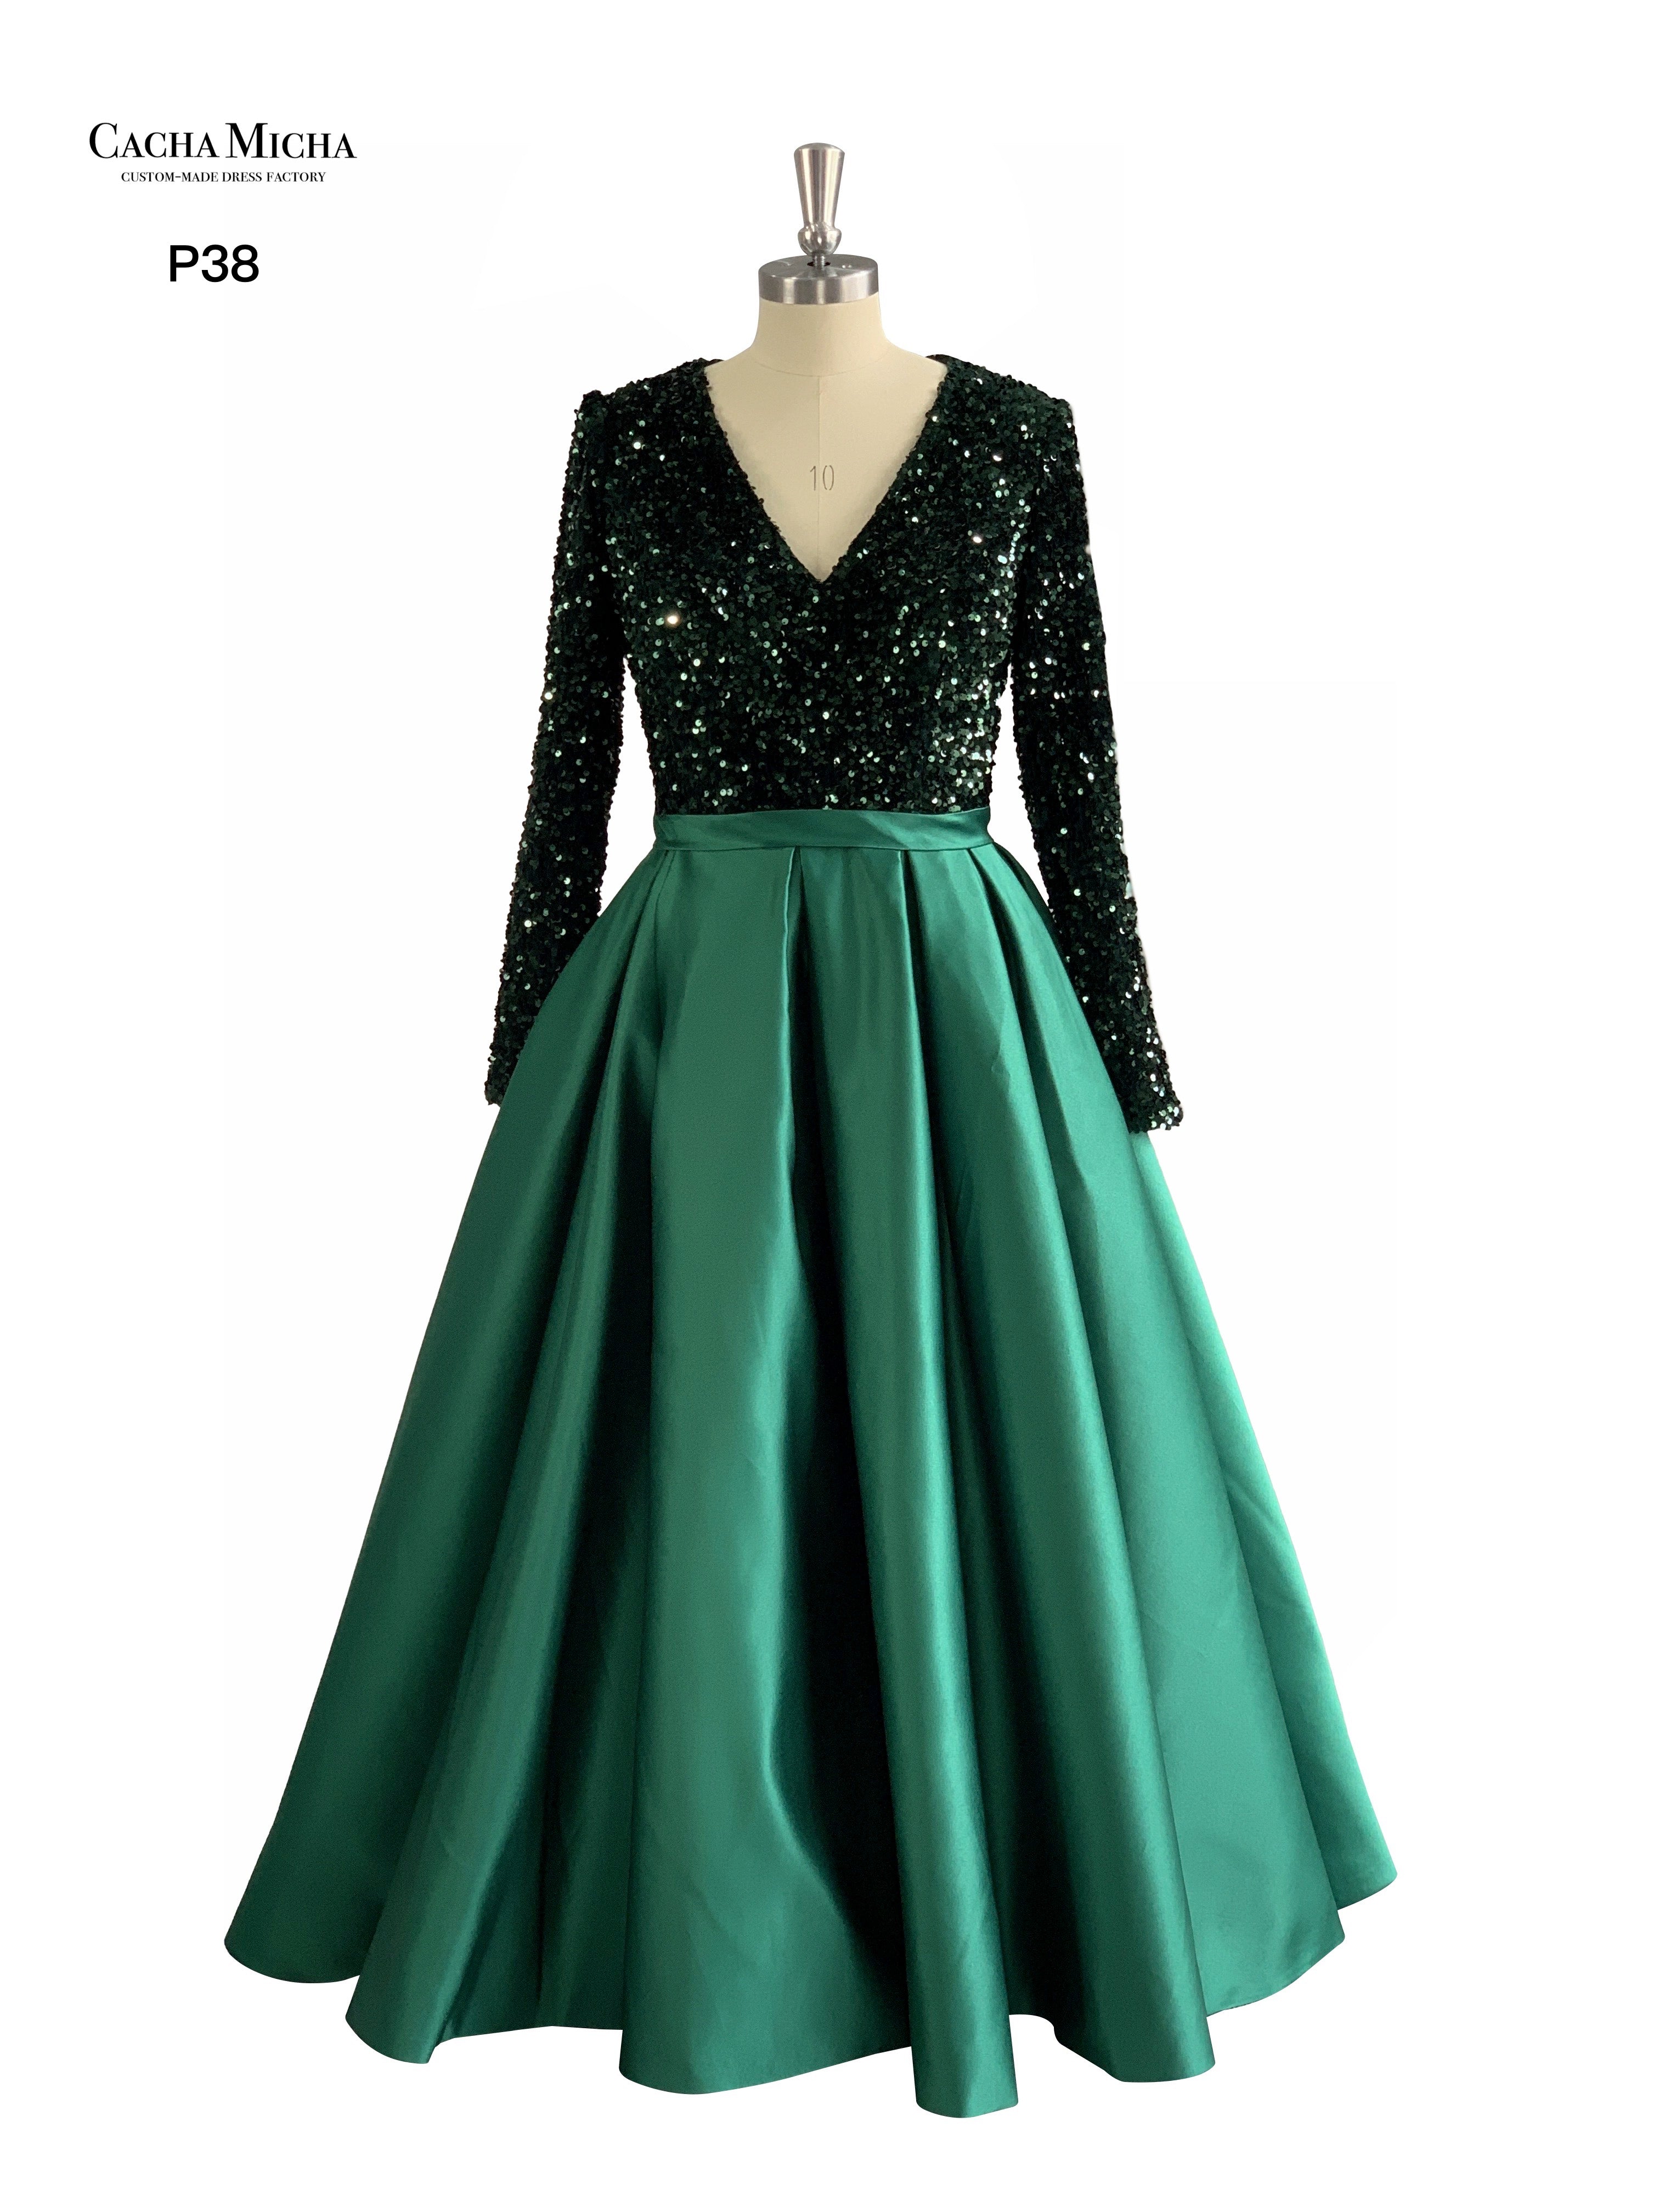 Sequin Long Sleeves Green Satin Prom Dress P38